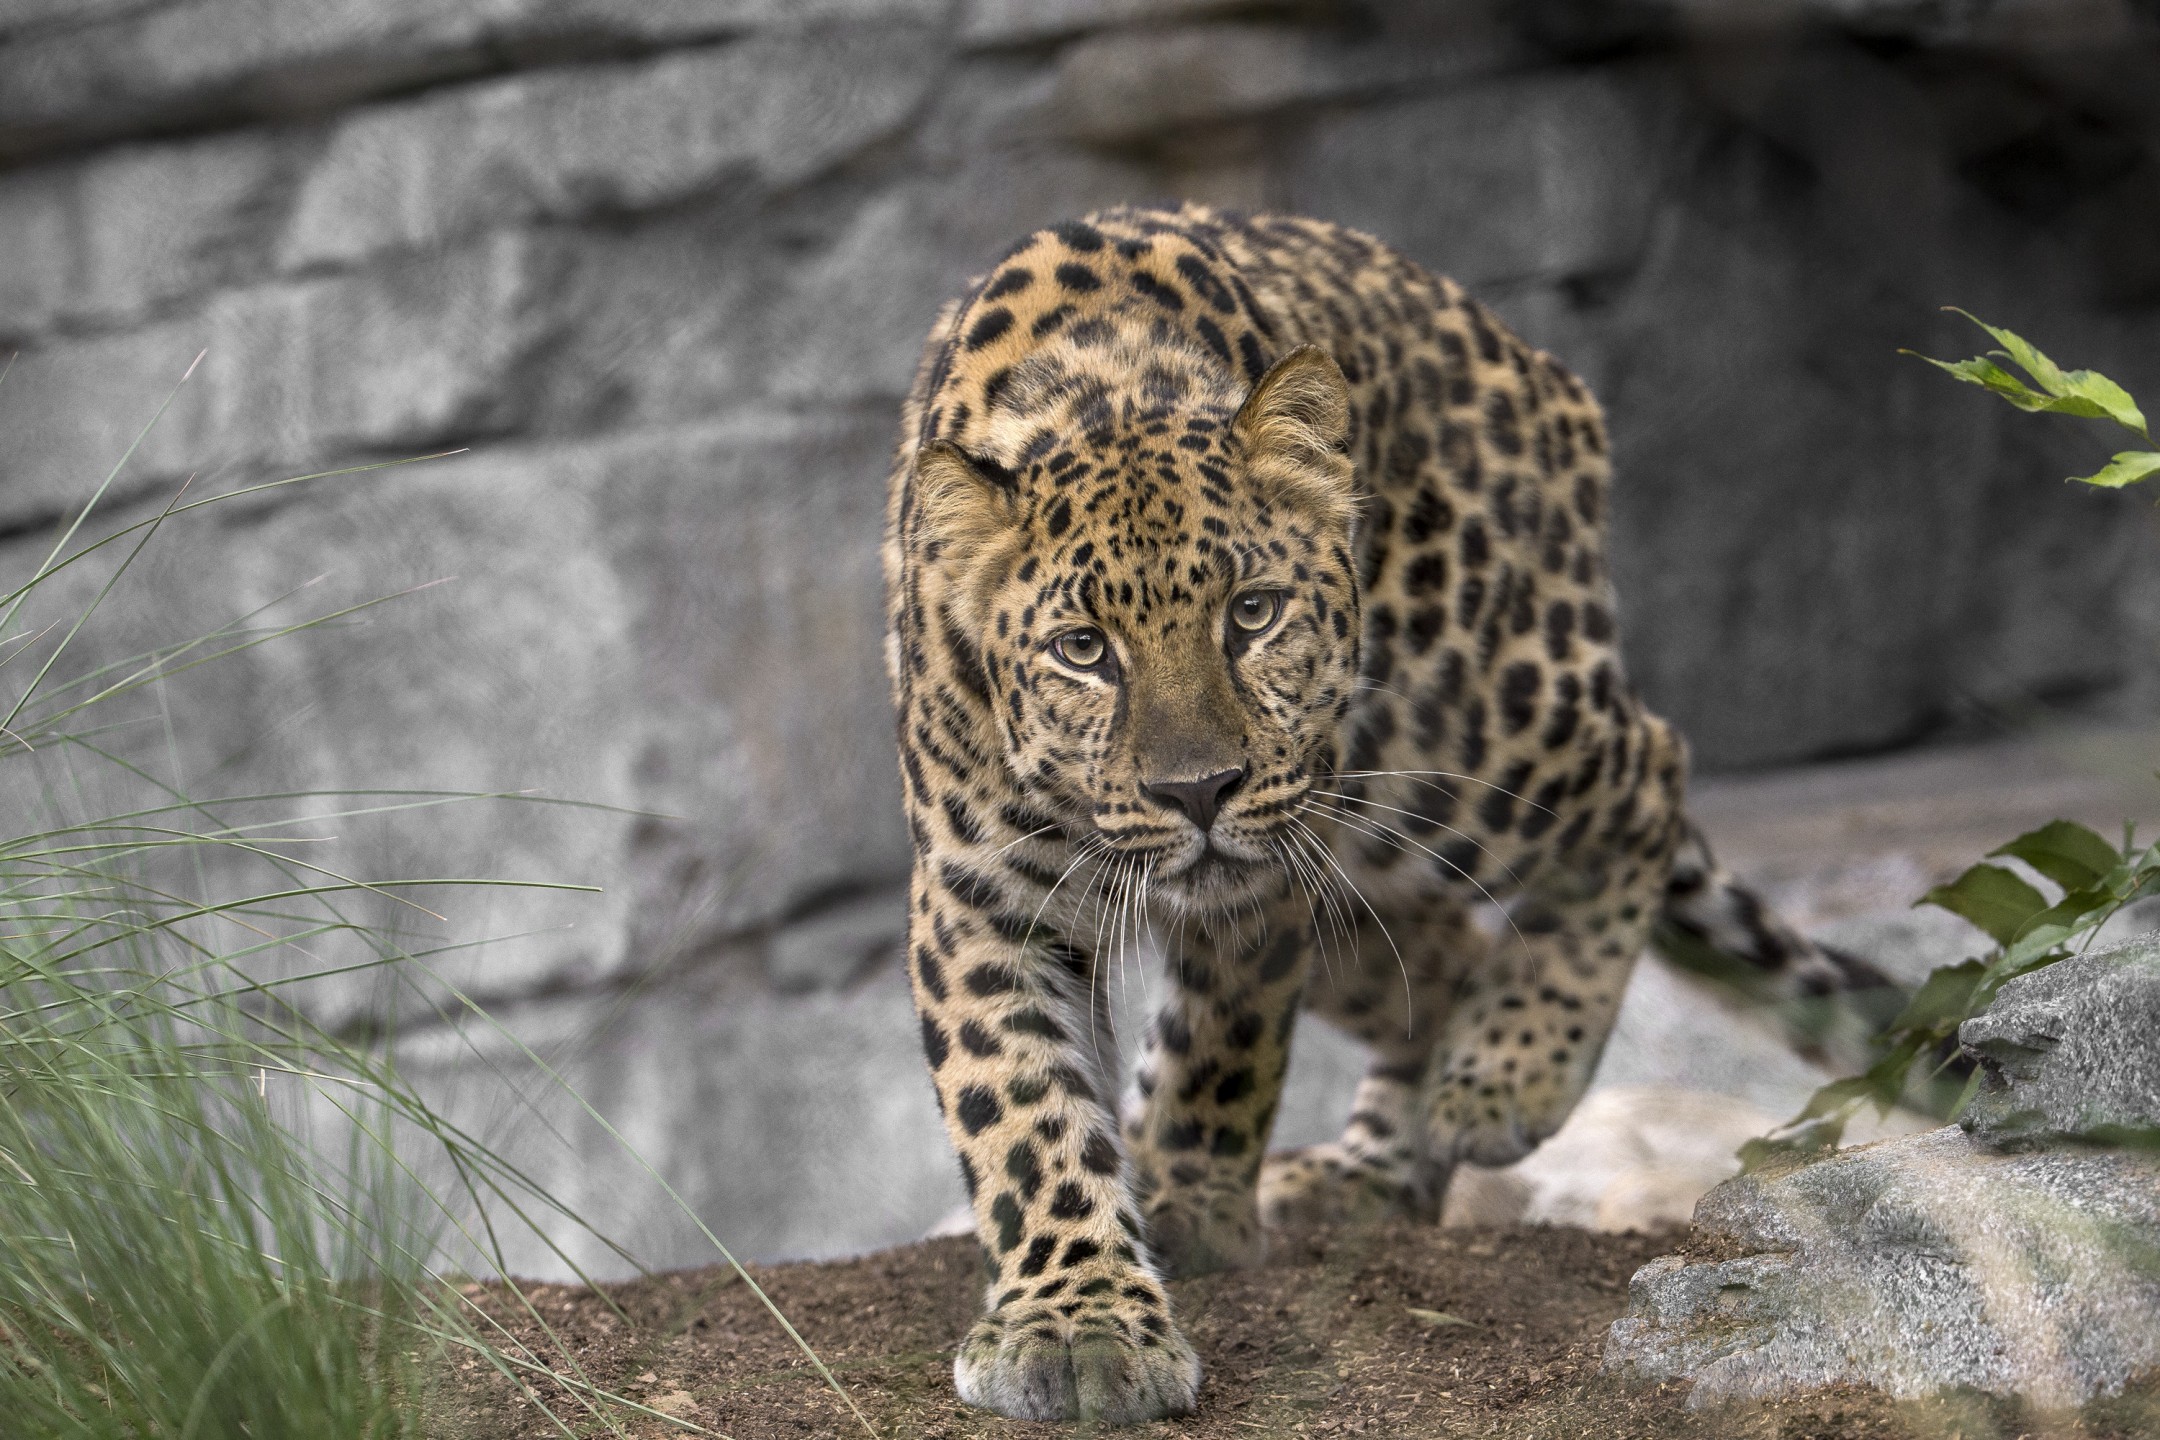 The Amur leopard is one of the most endangered cat species in the world, with less than 50 left in their native habitat and about 300 living in zoos, where a collaborative breeding and Species Survival Program is working to save them from extinction.